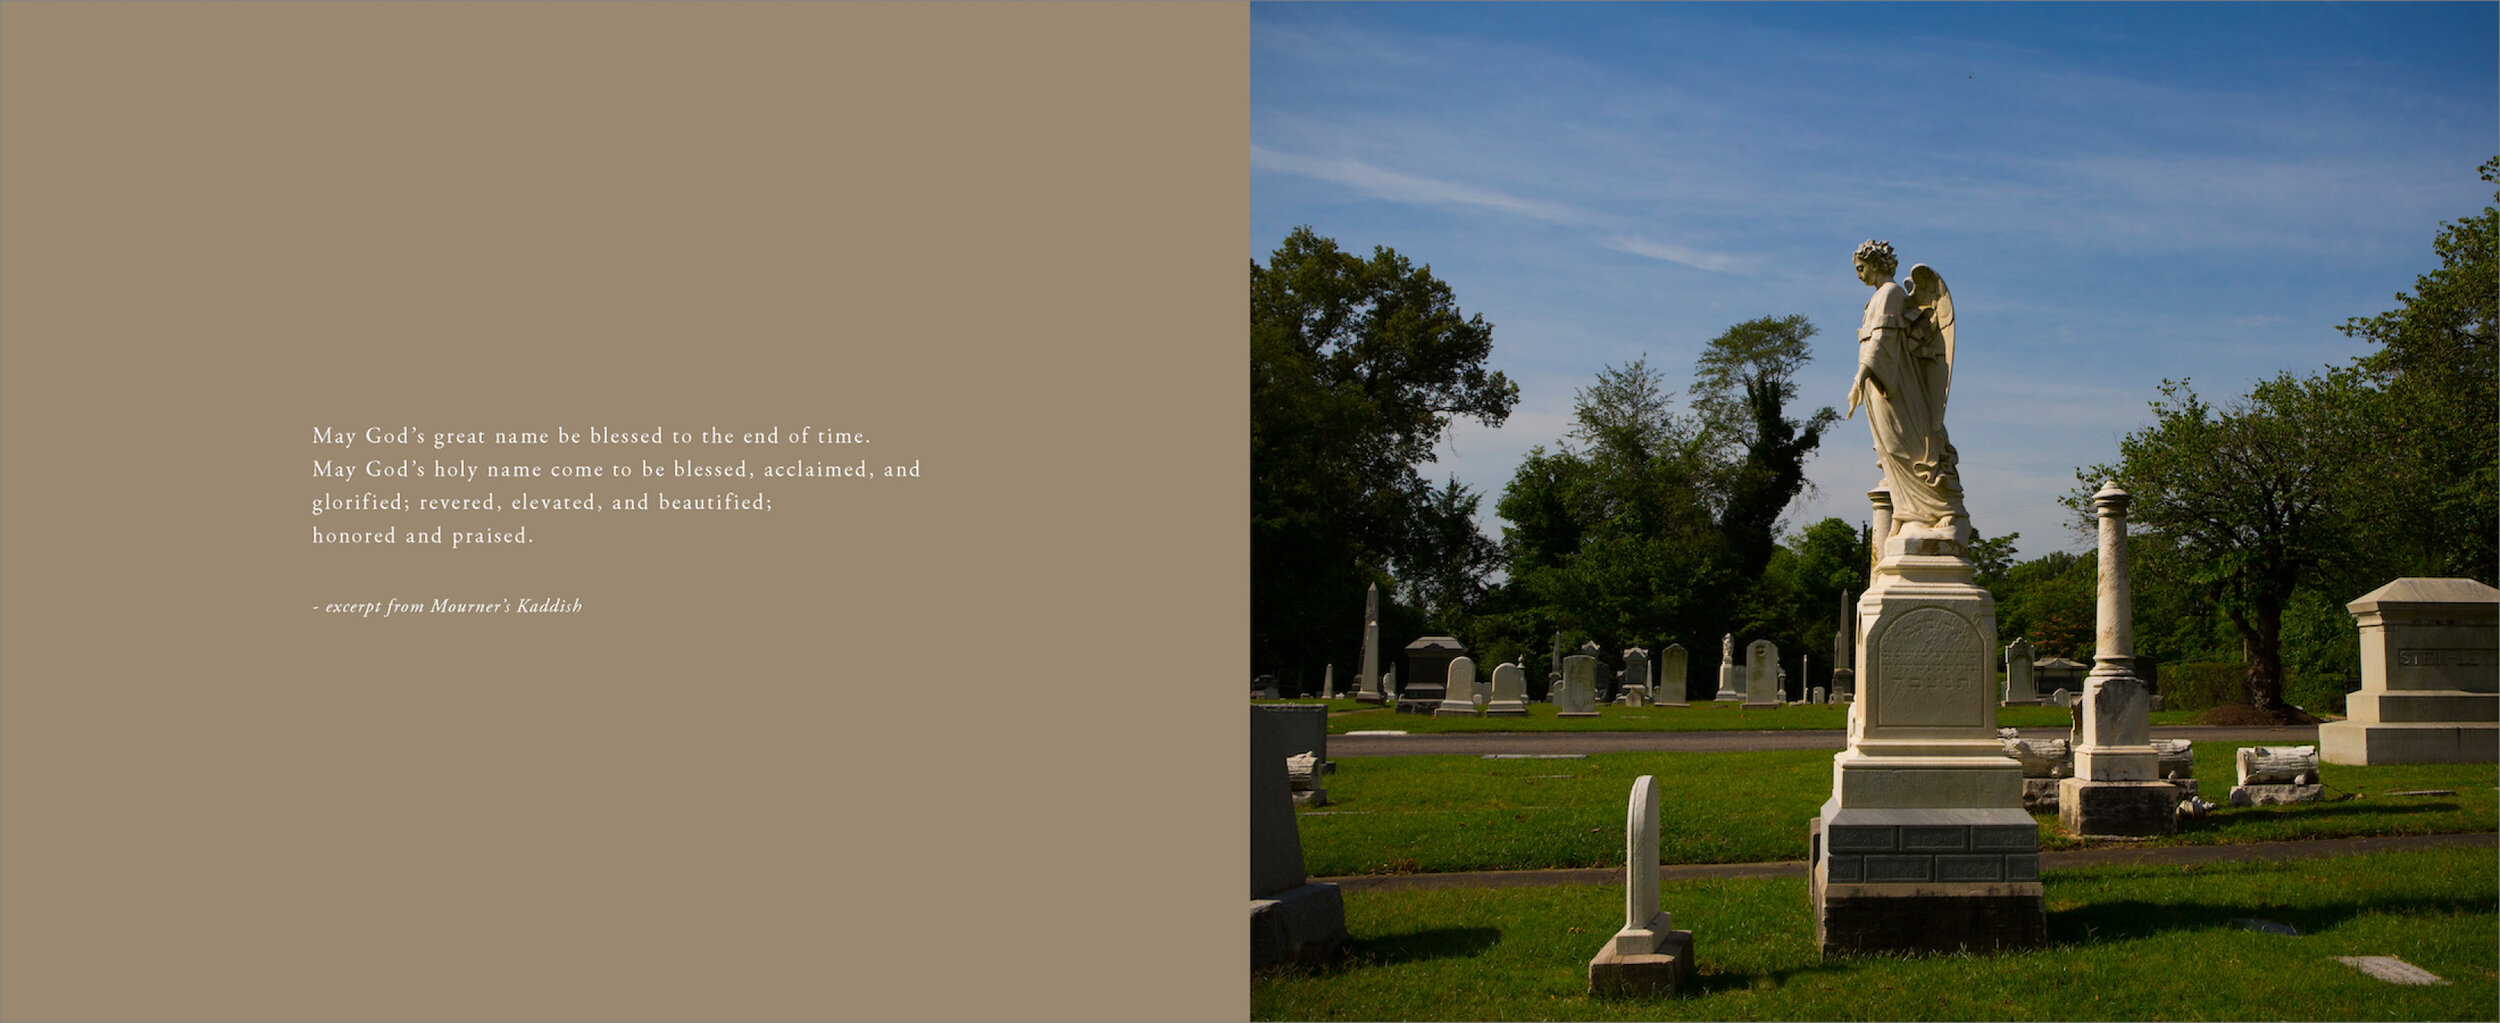  BELOVED page spread  Historic Temple Israel Cemetery Book Project  Photograph by Murray Riss  Design by Chuck Mitchell &amp; Reid Mitchell  Photo retouching by Reid Mitchell  Published by Susan Schadt Press 